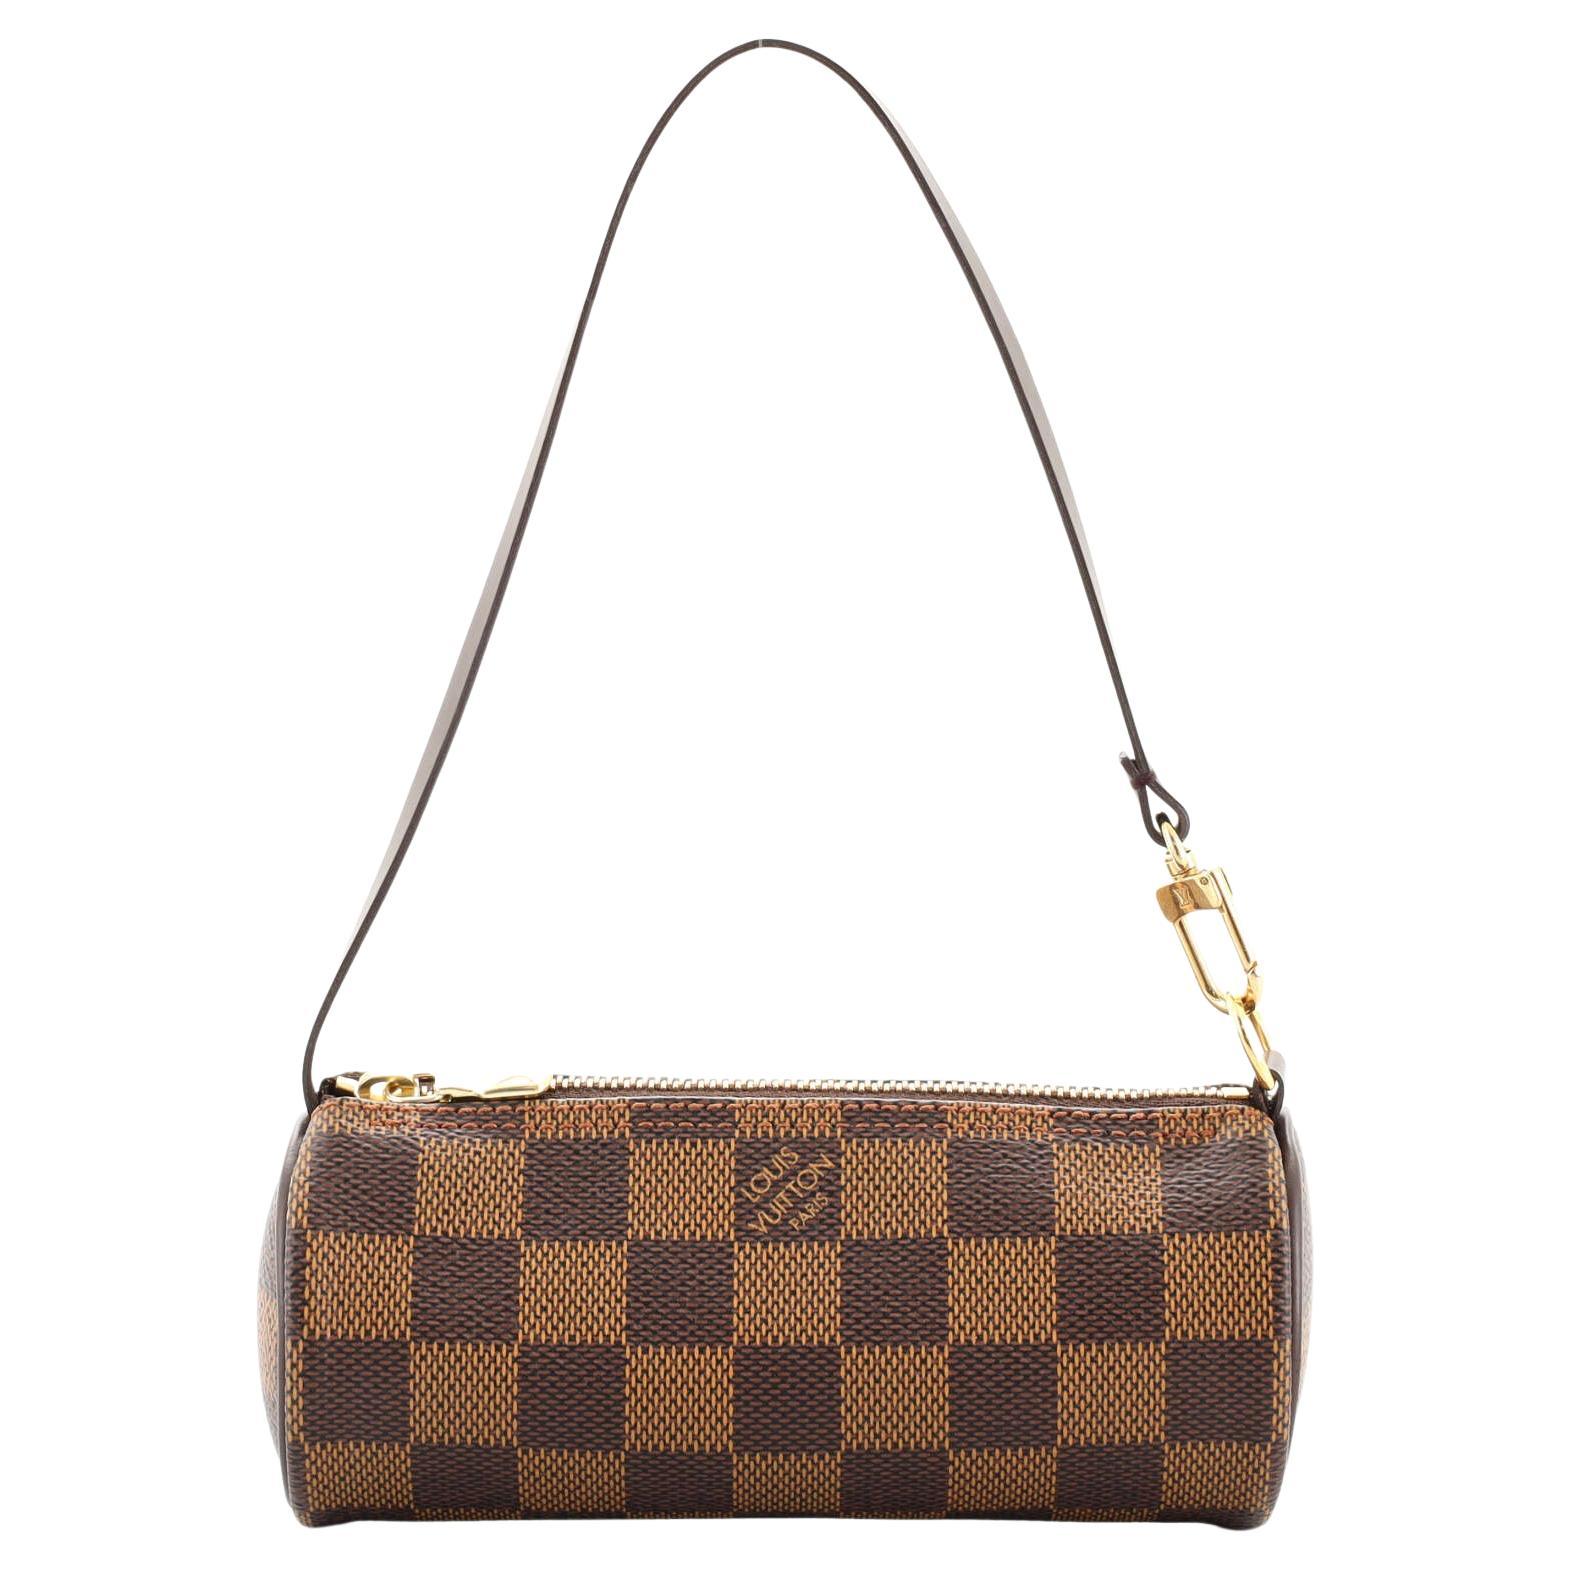 LV Papillon BB 2021]Review My Lux Louis Vuitton Papillon BB by 2021 spring  summer Pool collection 